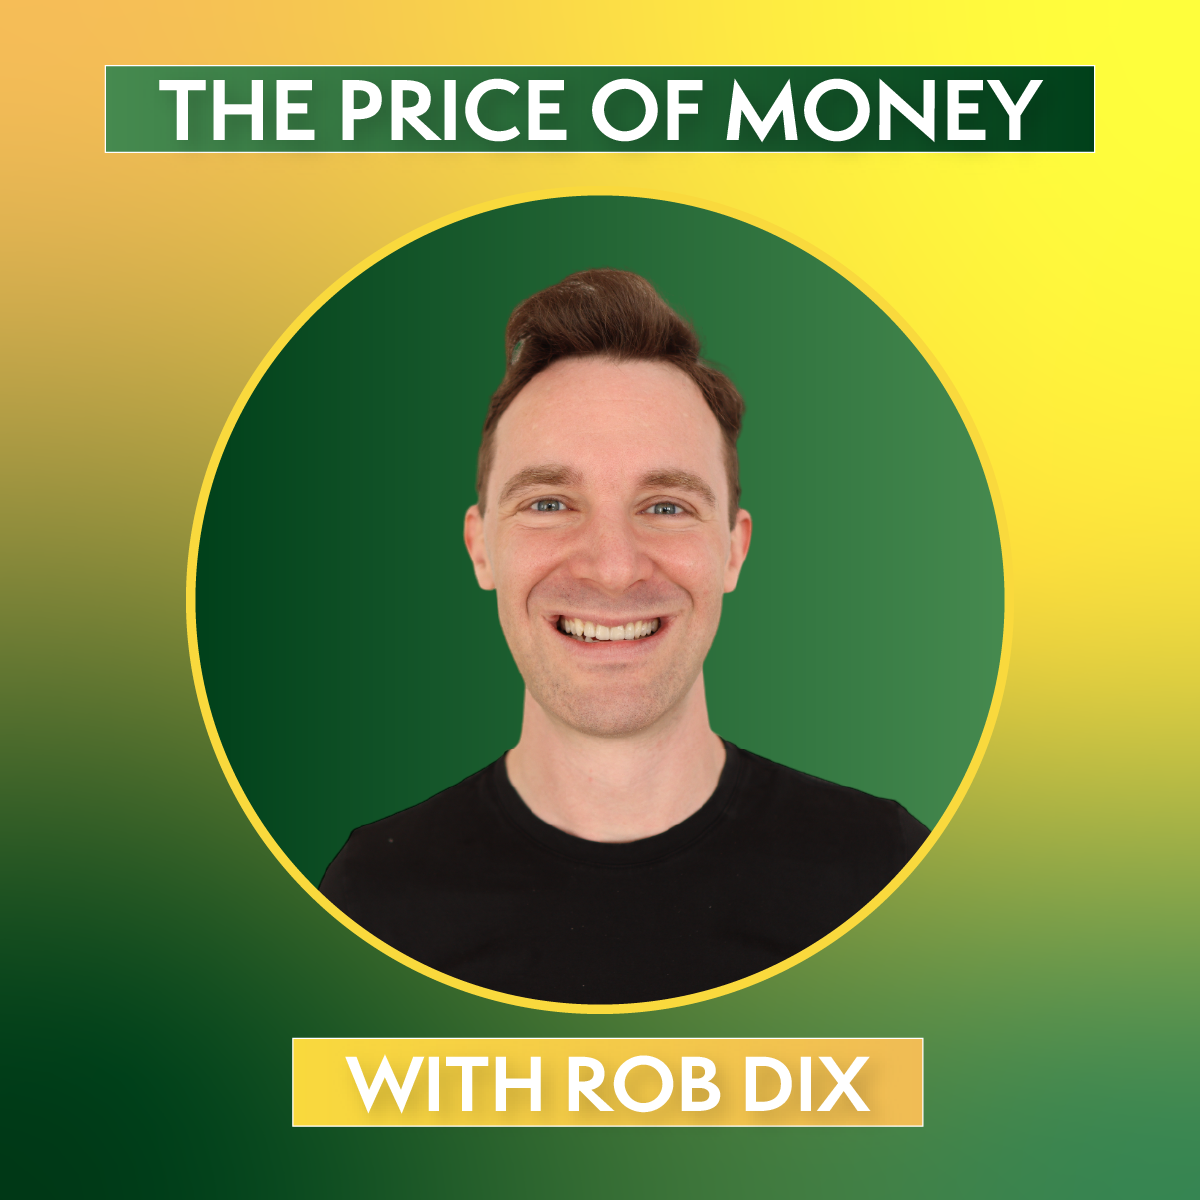 The Price of Money, with Rob Dix